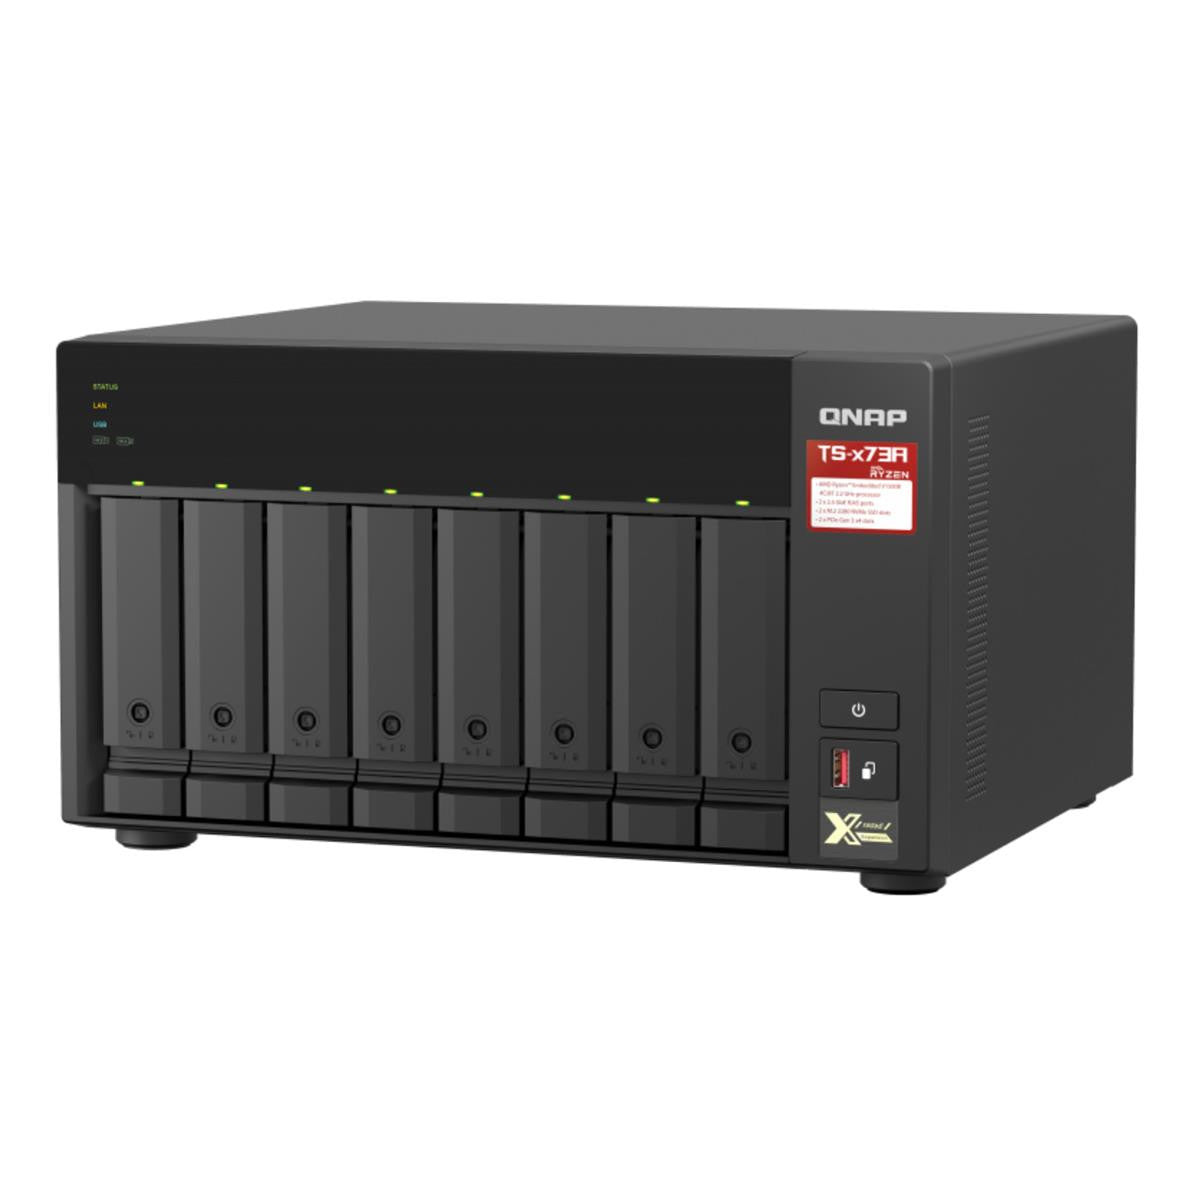 QNAP TS-873A 8-BAY NAS with 32GB DDR4 RAM and 80TB (8x10TB) Seagate Ironwolf NAS Drives Fully Assembled and Tested